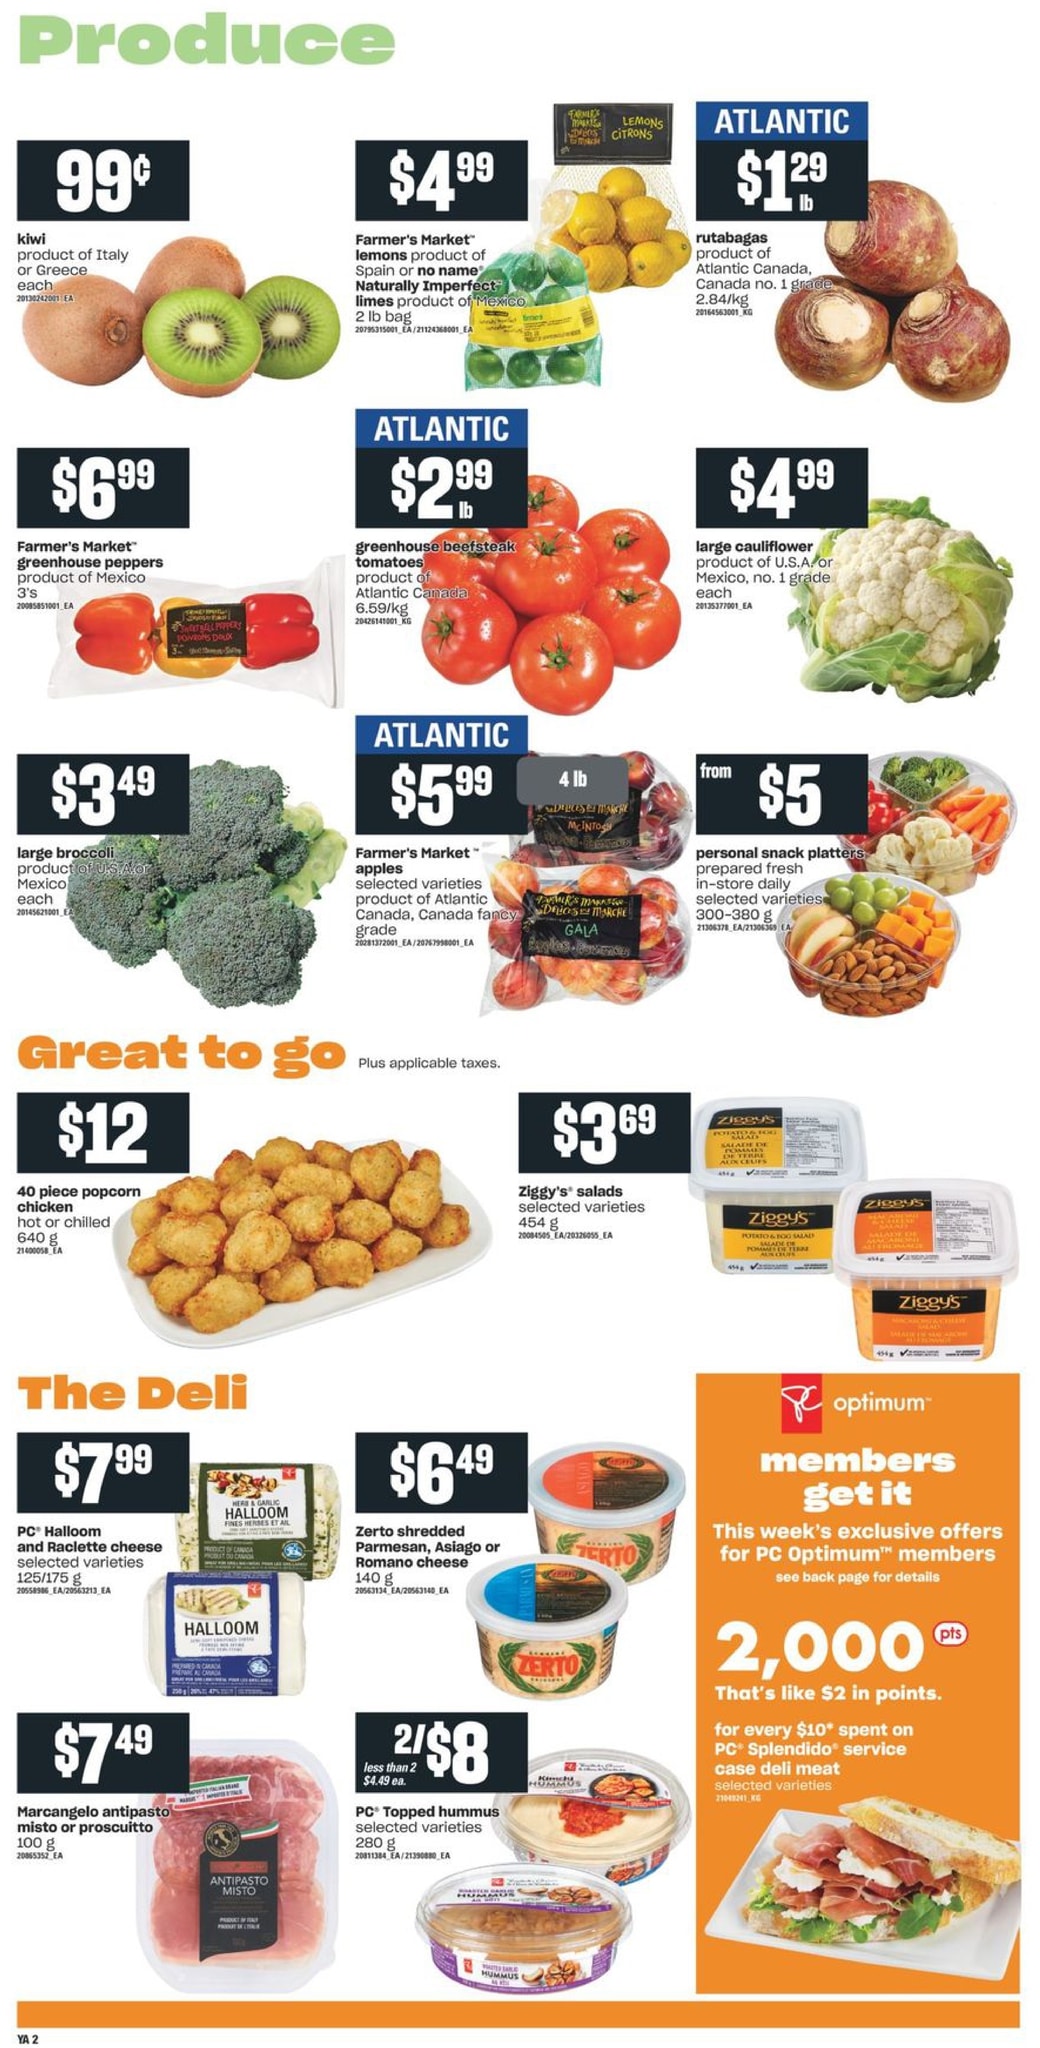 Independent Atlantic - Weekly Flyer Specials - Page 3